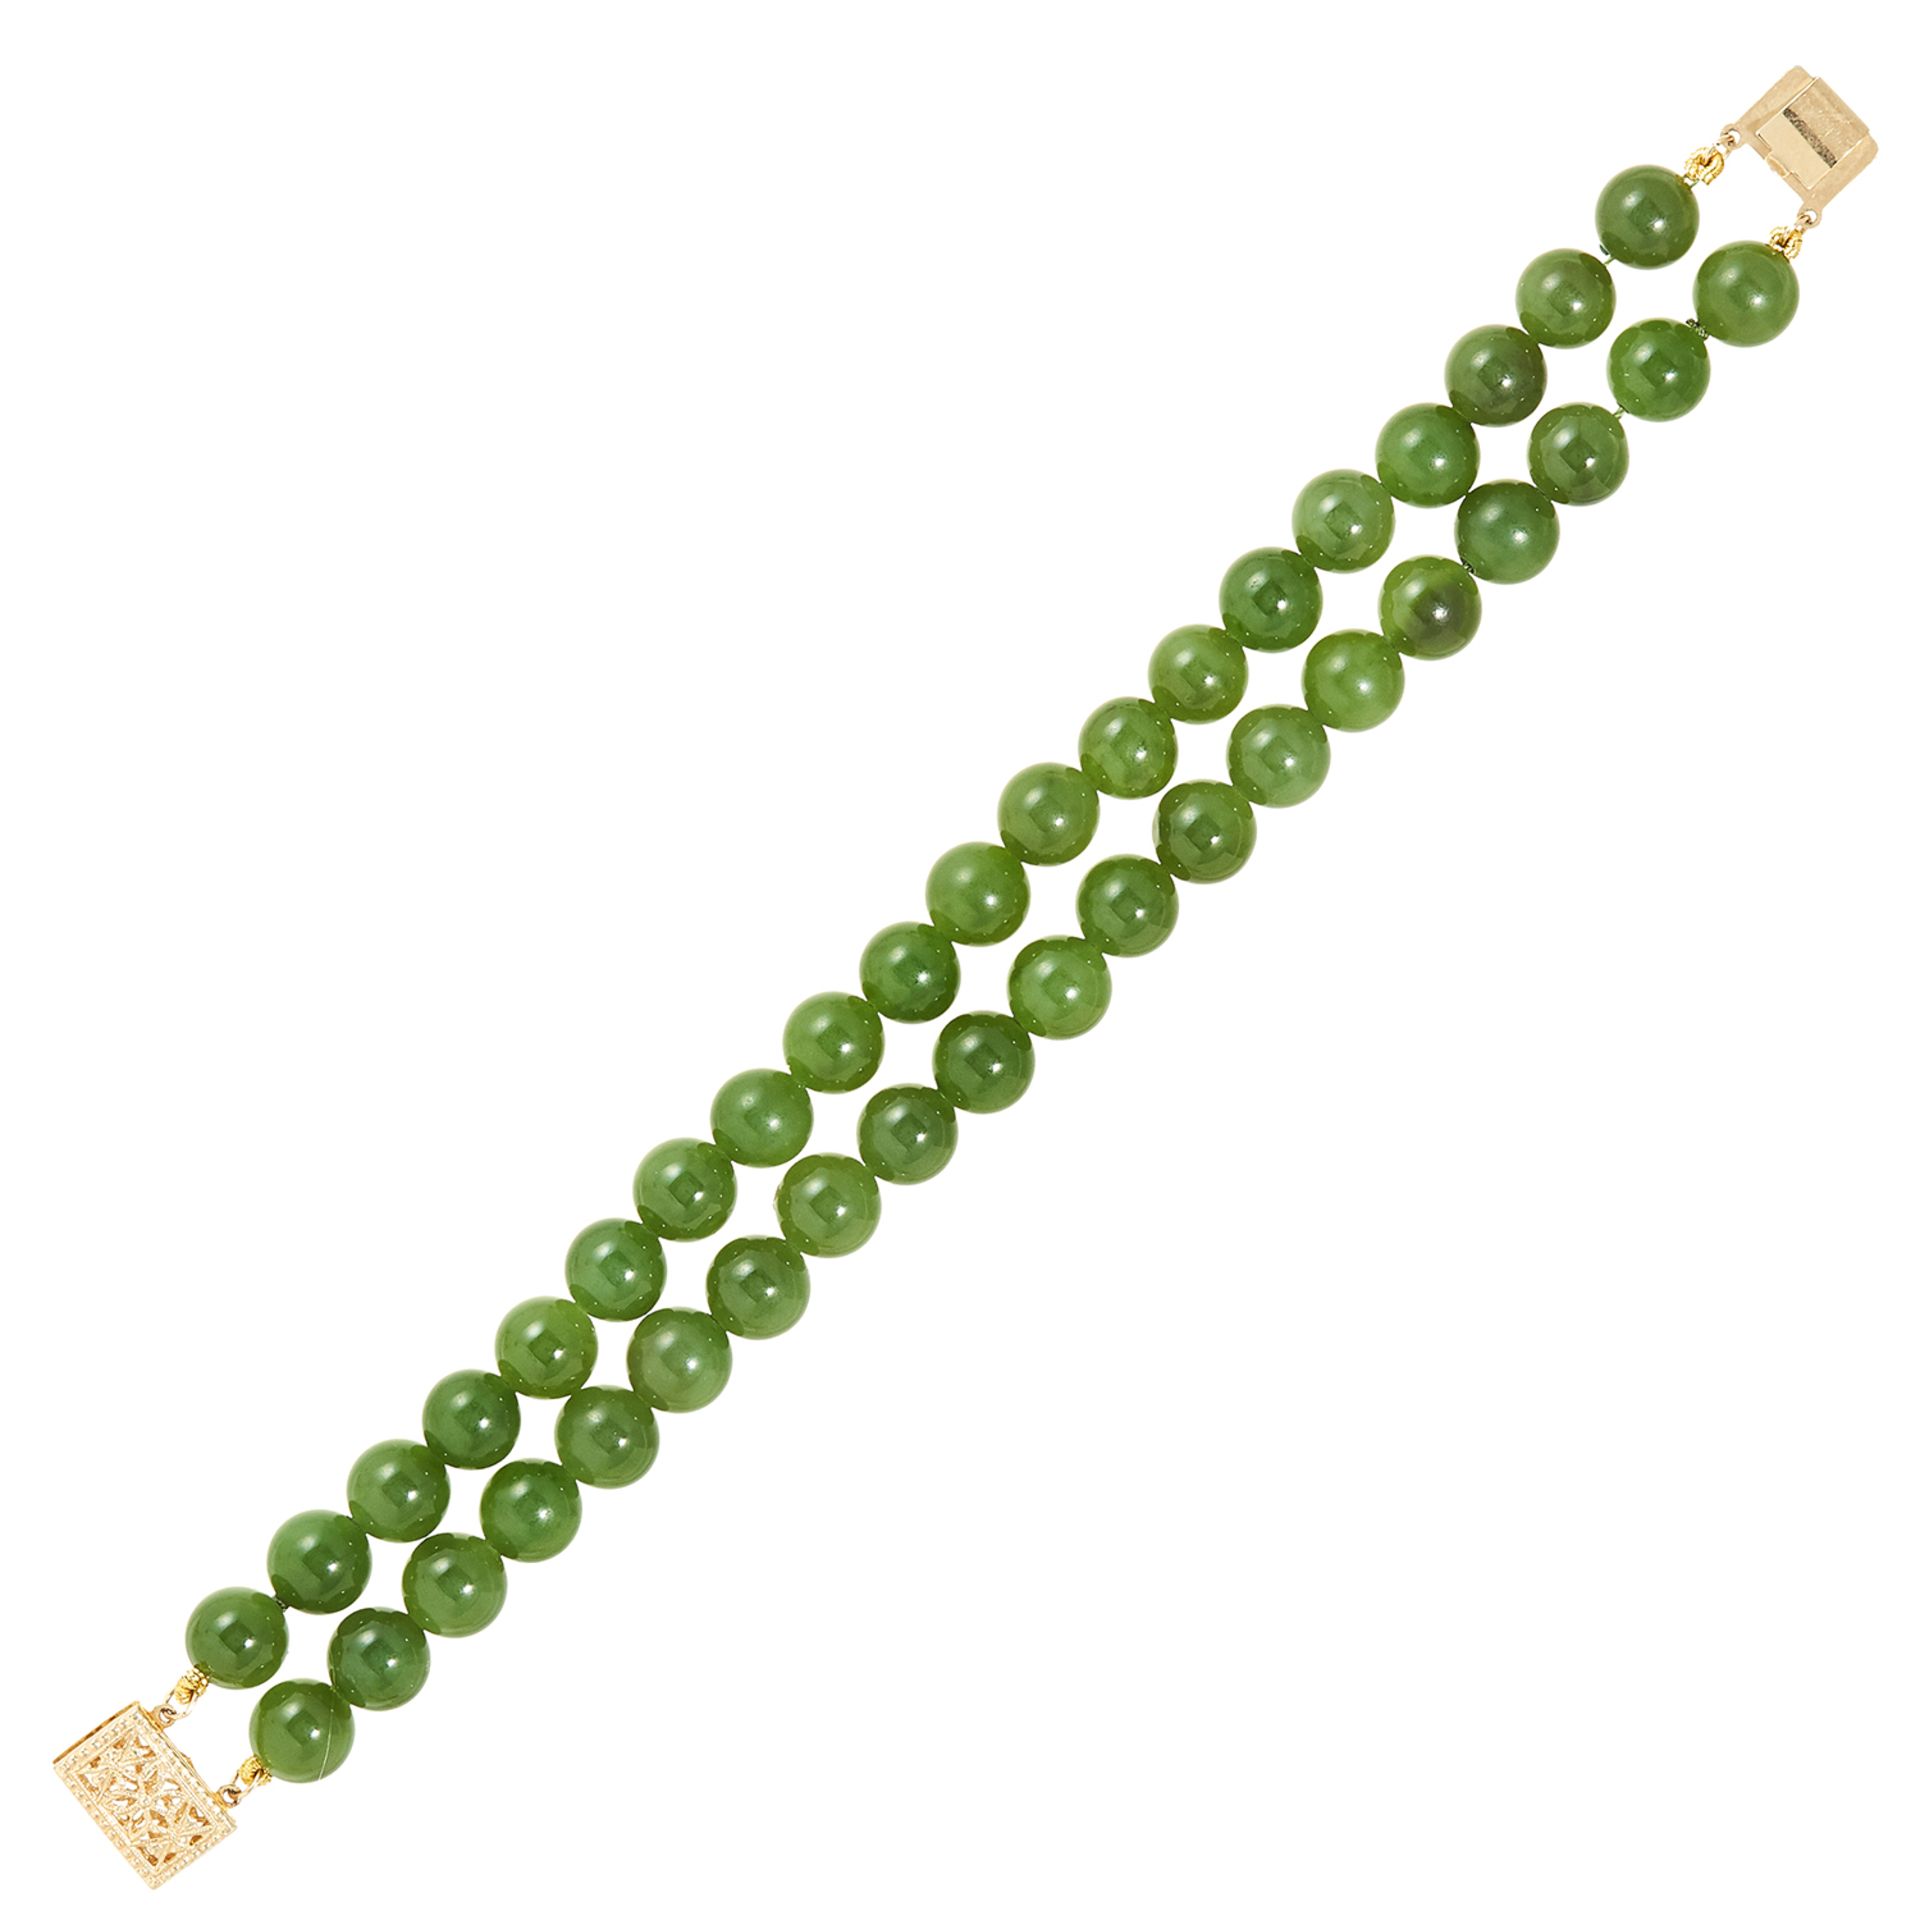 JADE BEAD BRACELET comprising of two rows of polished jade beads, 17cm, 31.81g.